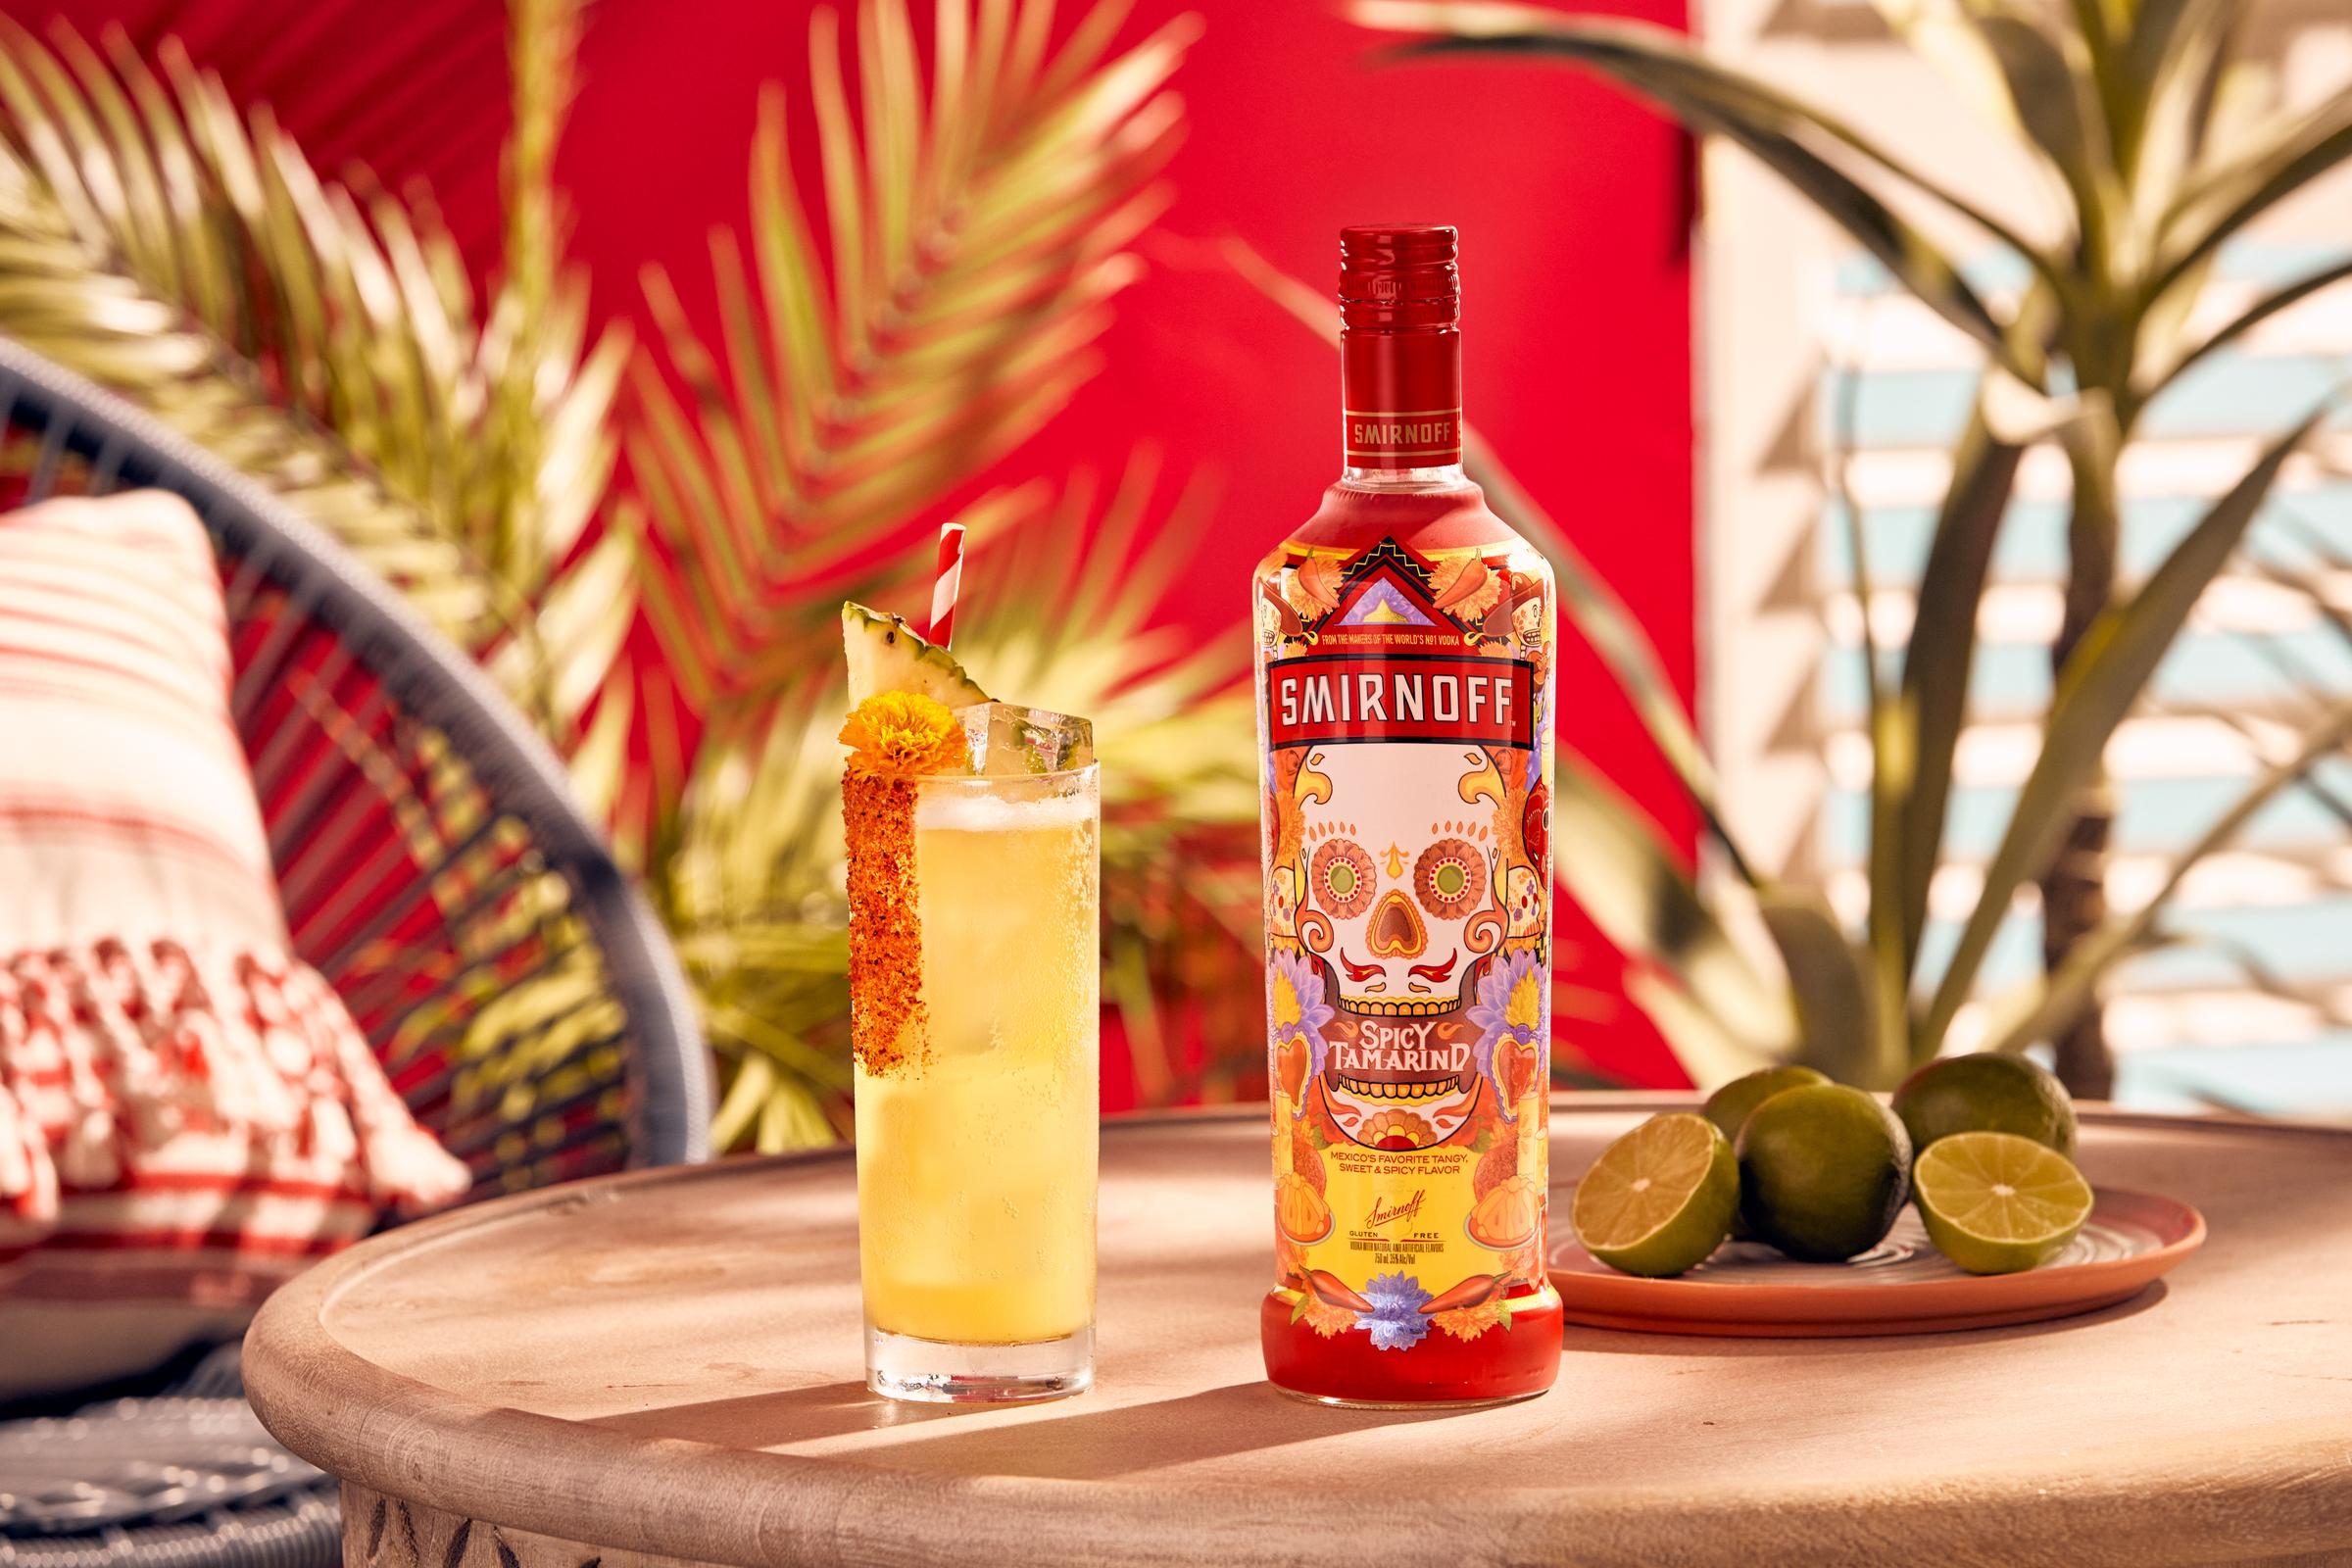 Smirnoff Spicy Tamarind vodka bottle alongside a yellow colored Pina Picante cocktail with a spicy rim, pineapple wedge and flower for garnish.